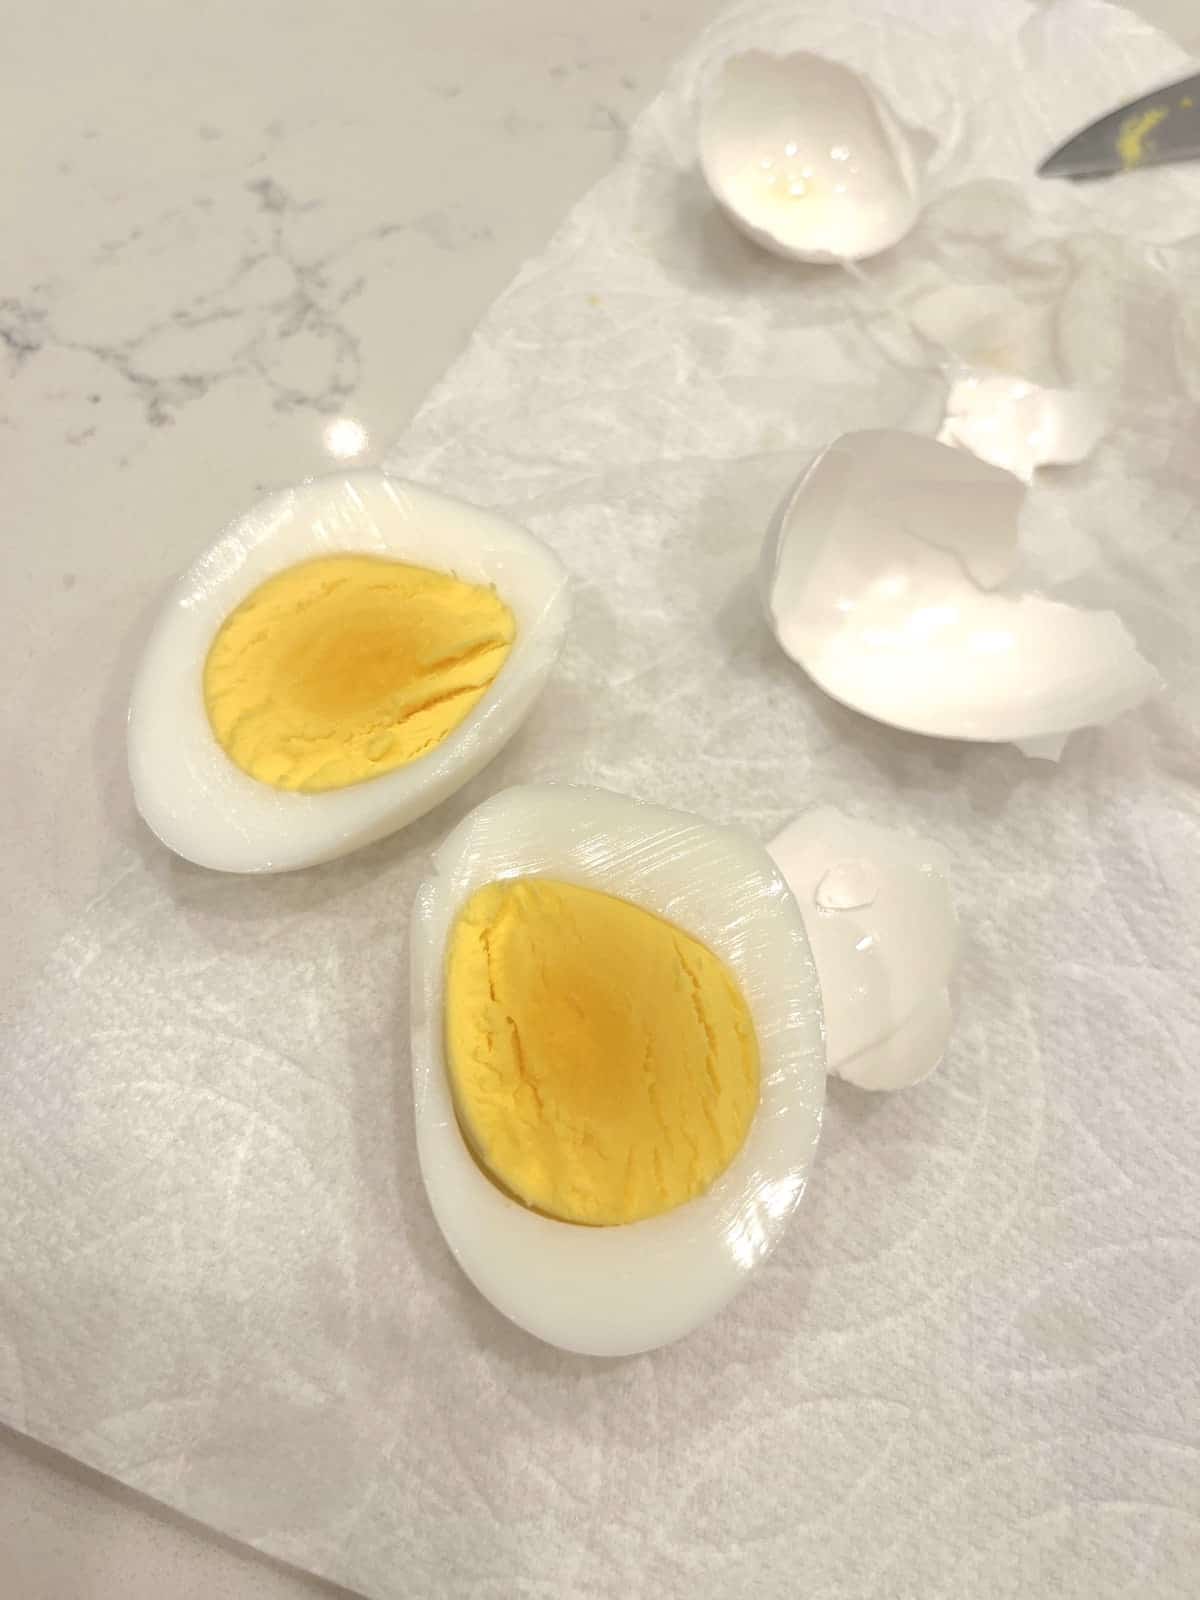 Hard-boiled eggs made in an 8 quart instant pot and shells